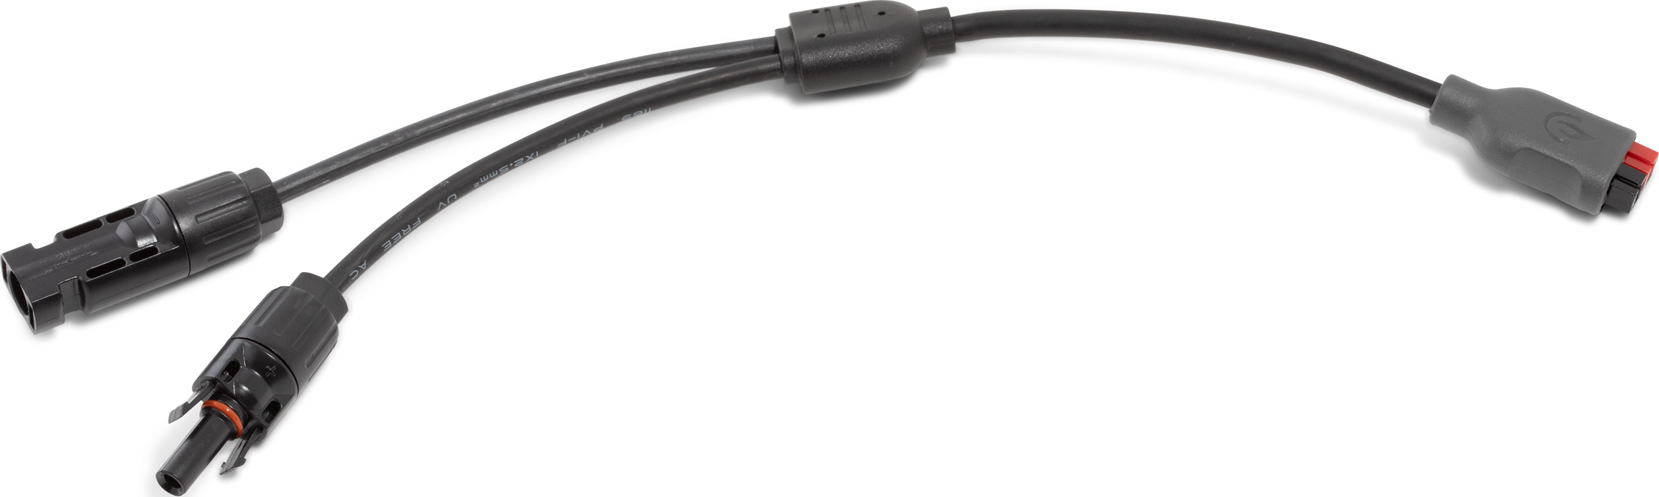 BioLite Solar MC4 To HPP Adapter Cable Black